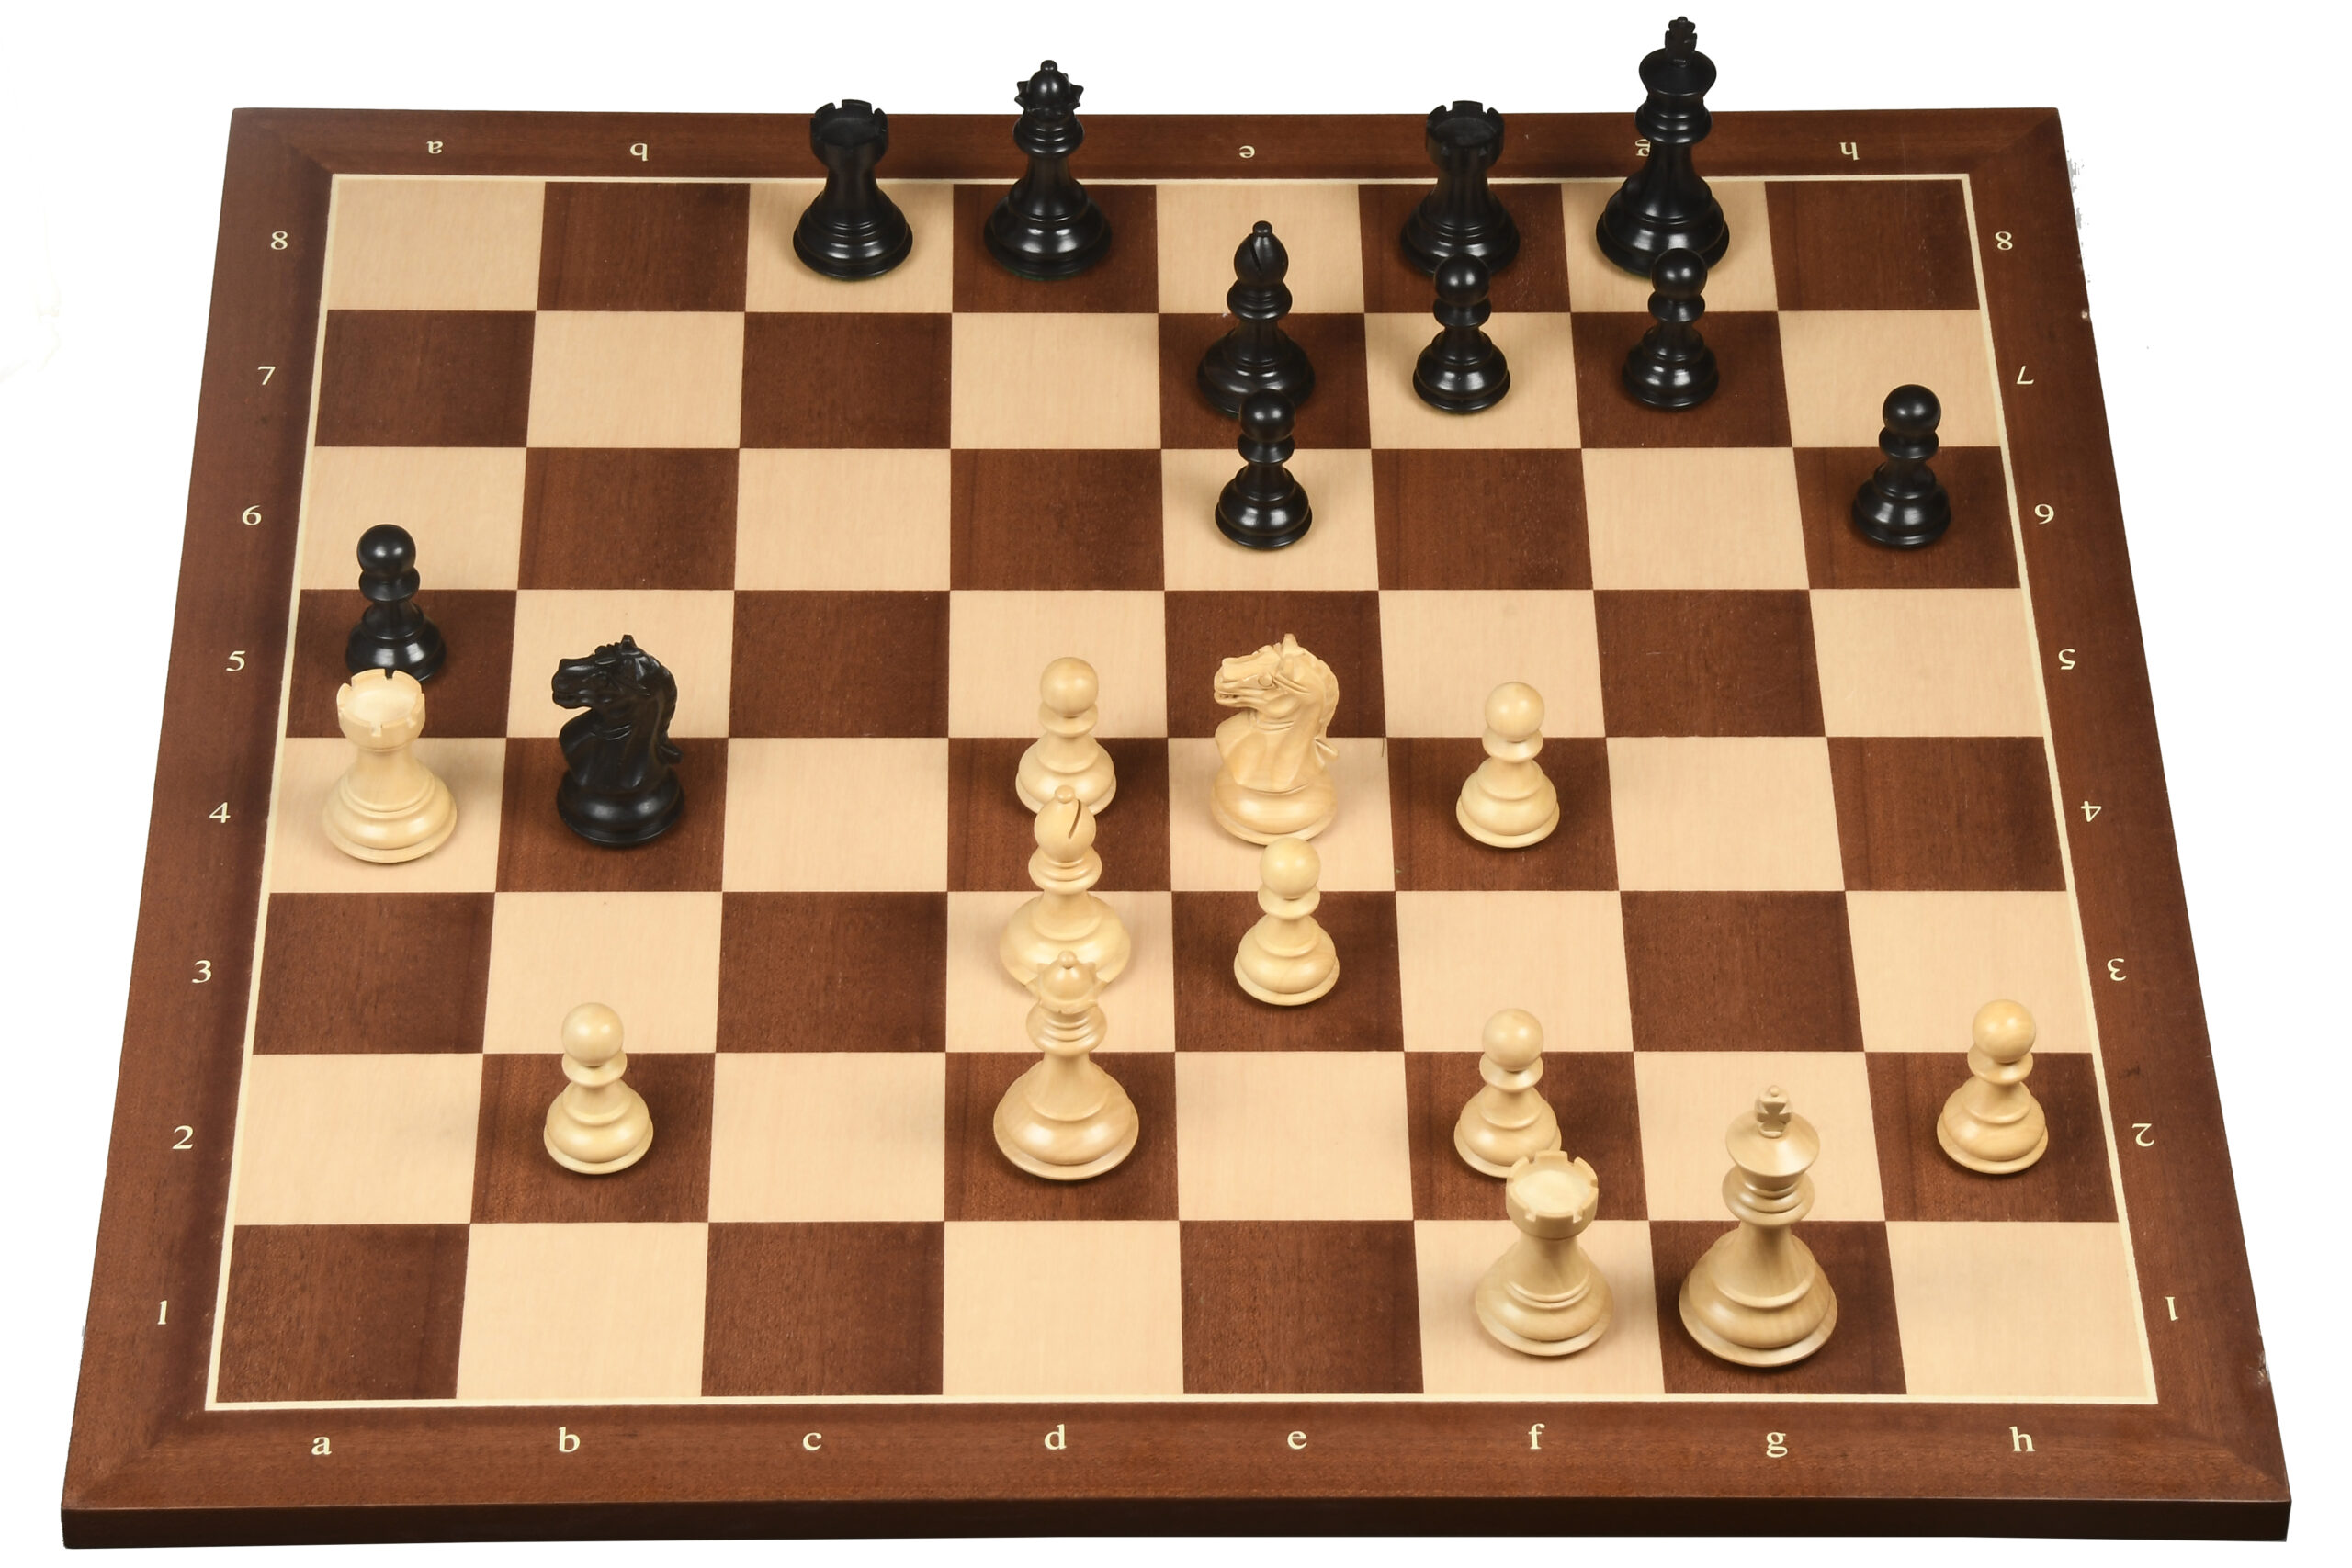 The Queen's Gambit Declined: A Perfect Opening for Chess Beginners